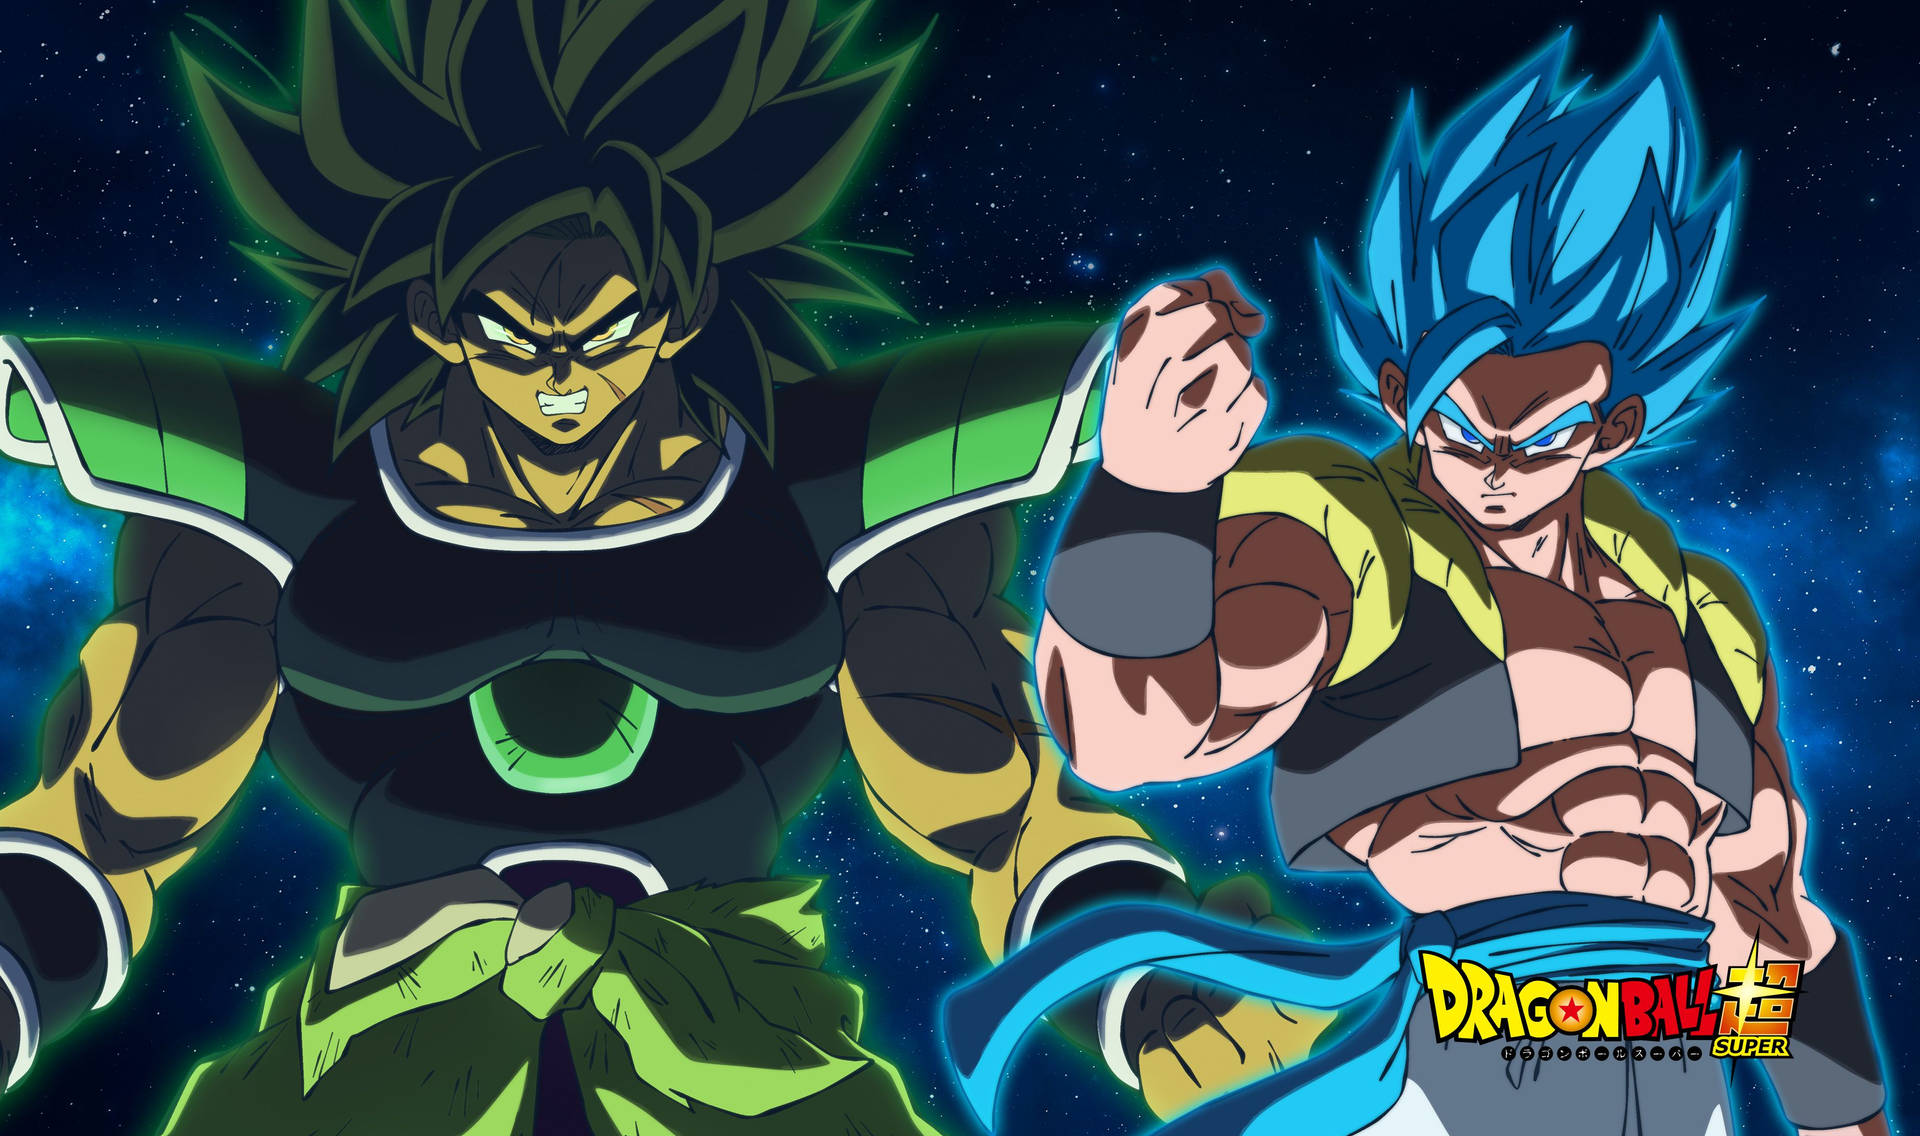 Gogeta and Broly team up in Dragon Ball Super: Broly Wallpaper